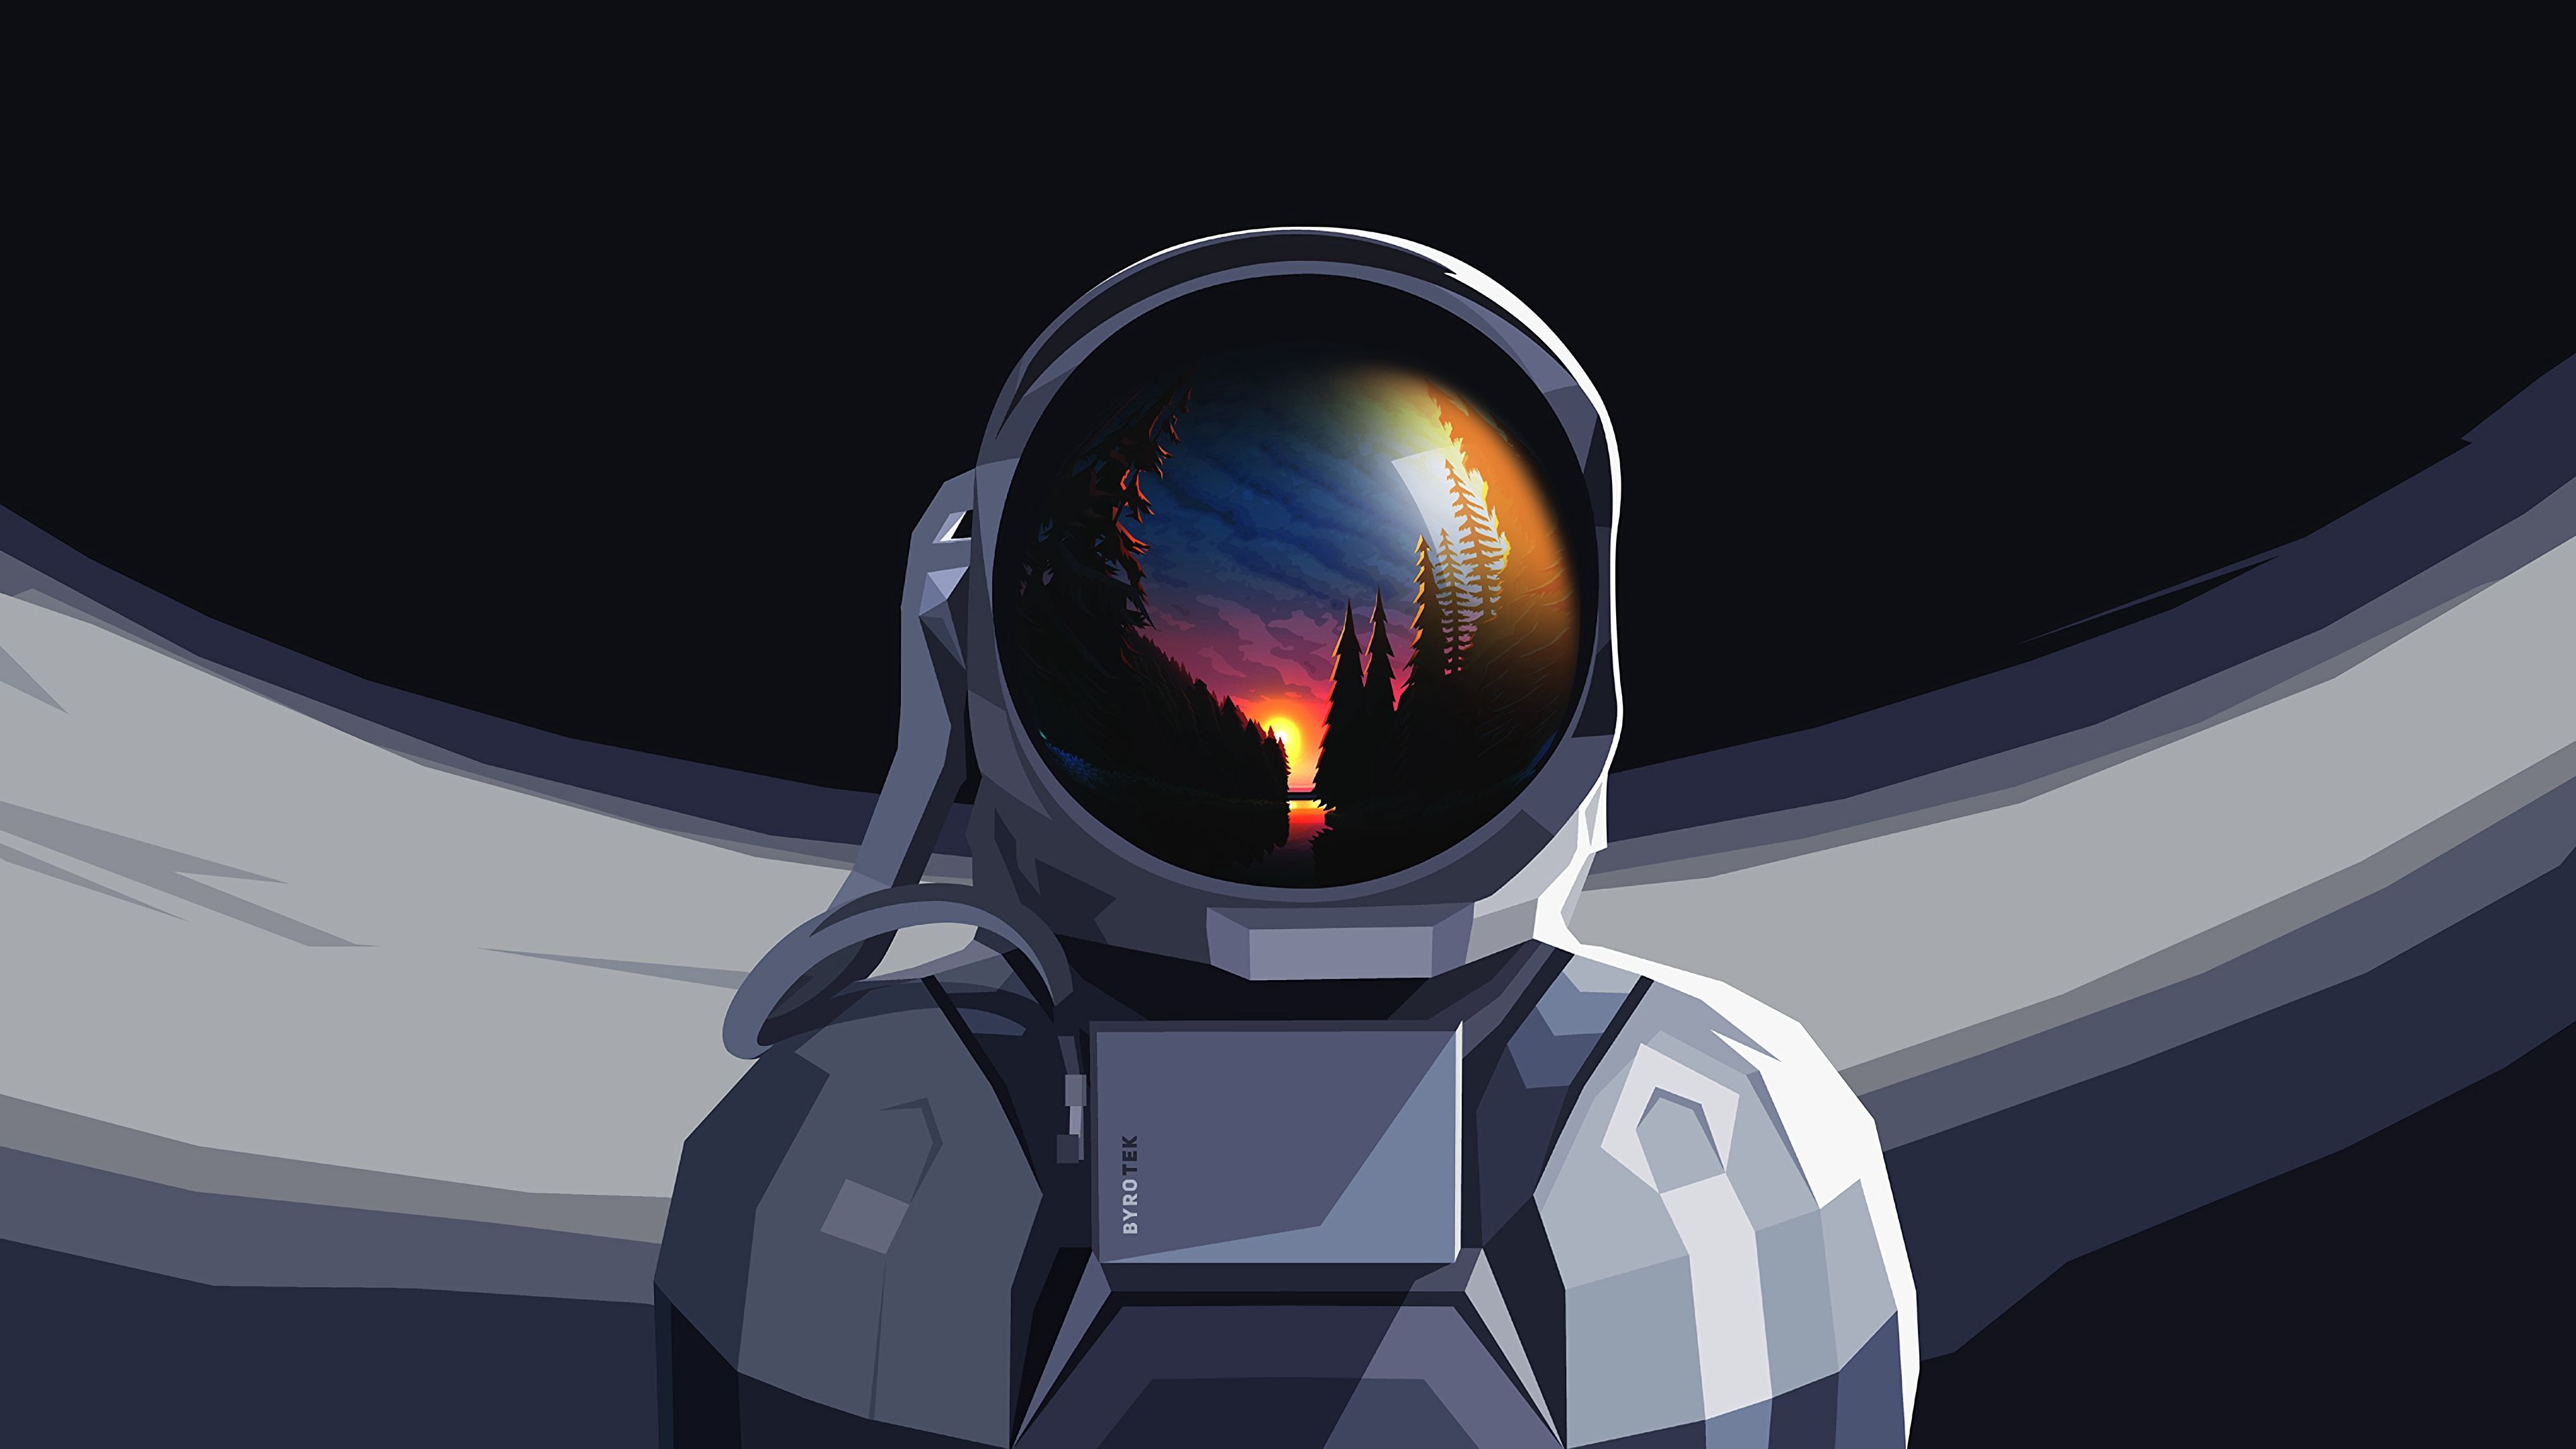 Astronaut 4K wallpaper for your desktop or mobile screen free